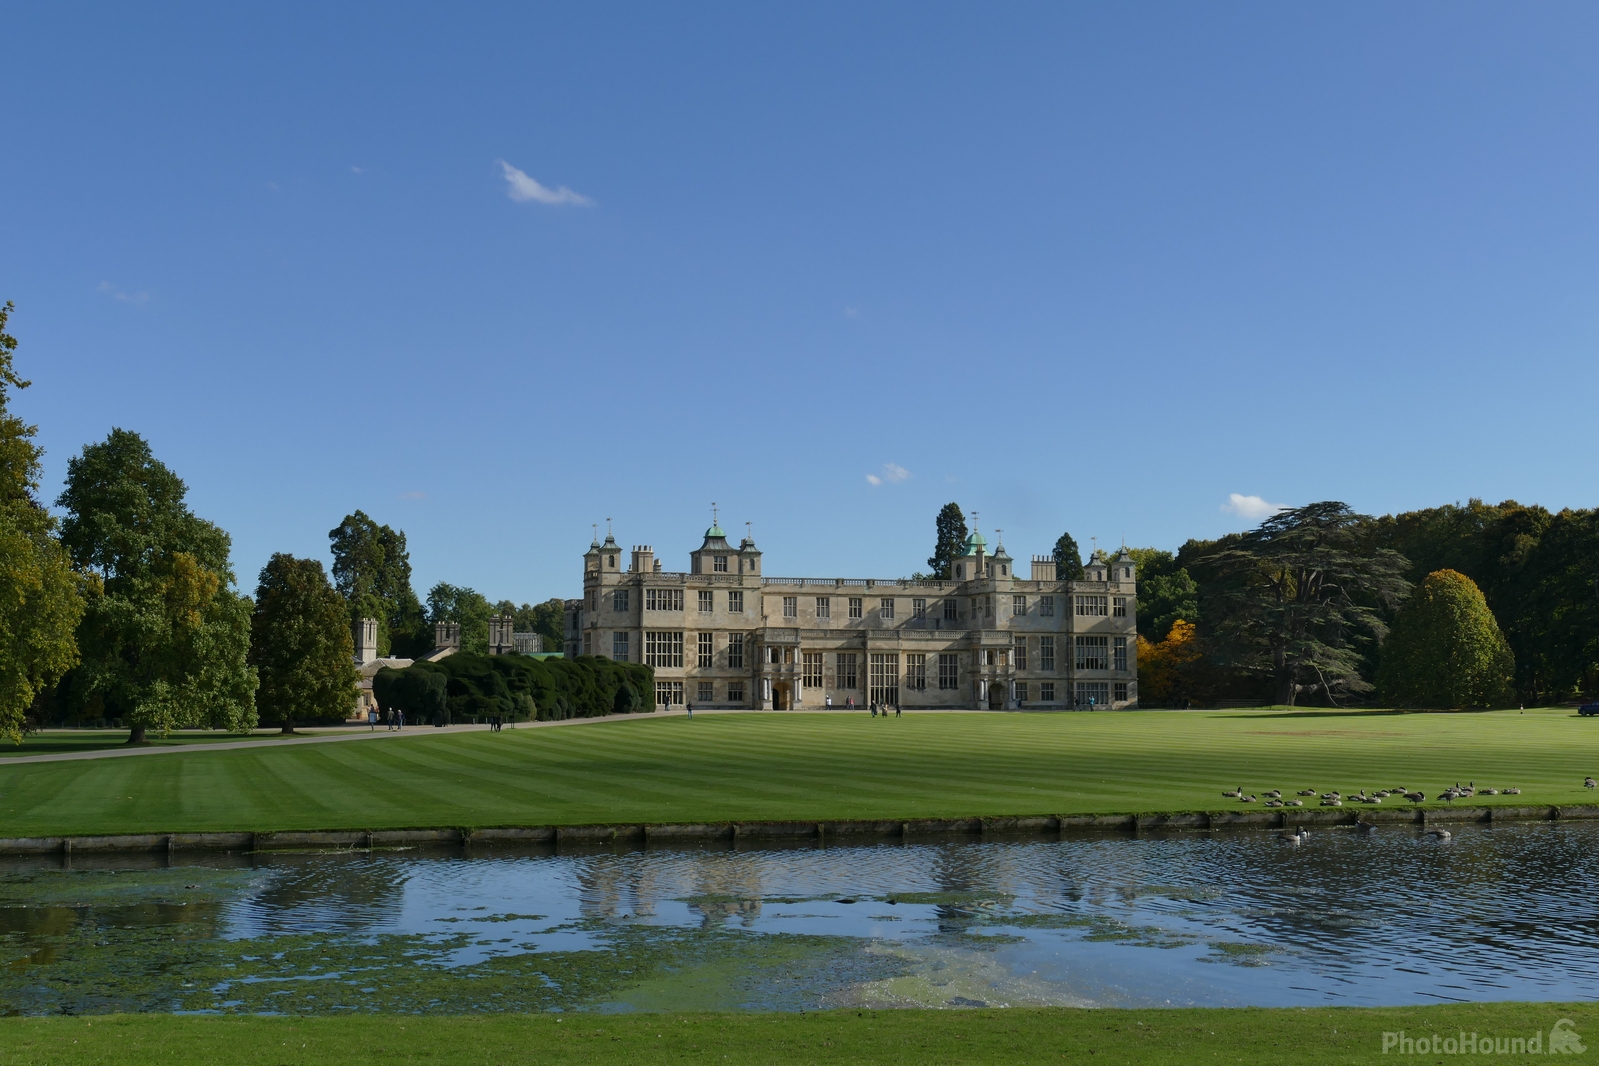 Image of Audley End house and garden by Harold Neale